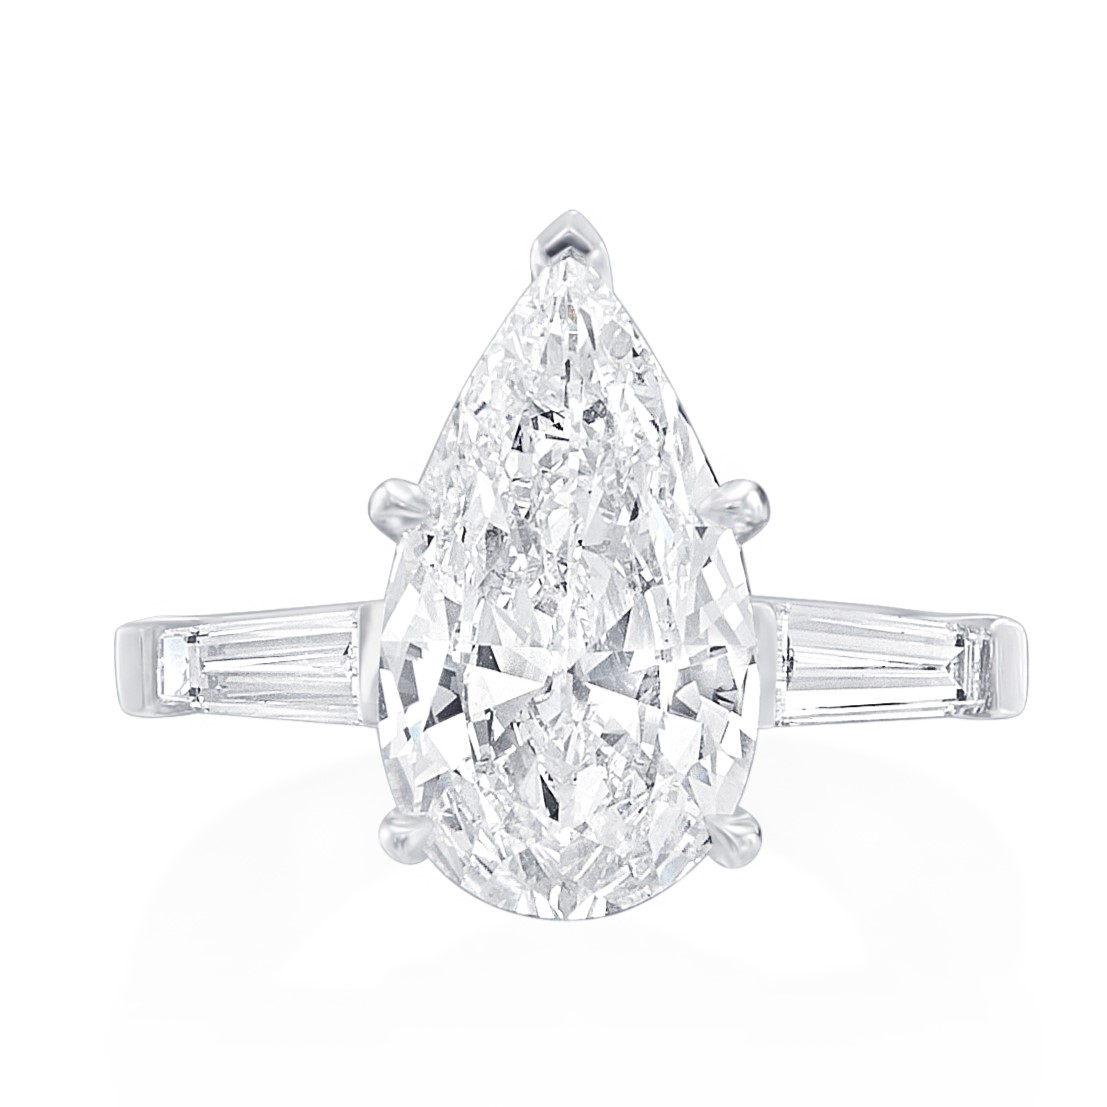 Korman Signature Platinum Pear Shaped Diamond Center Stone with  Tapered Baguette Side Stones Engagement Ring